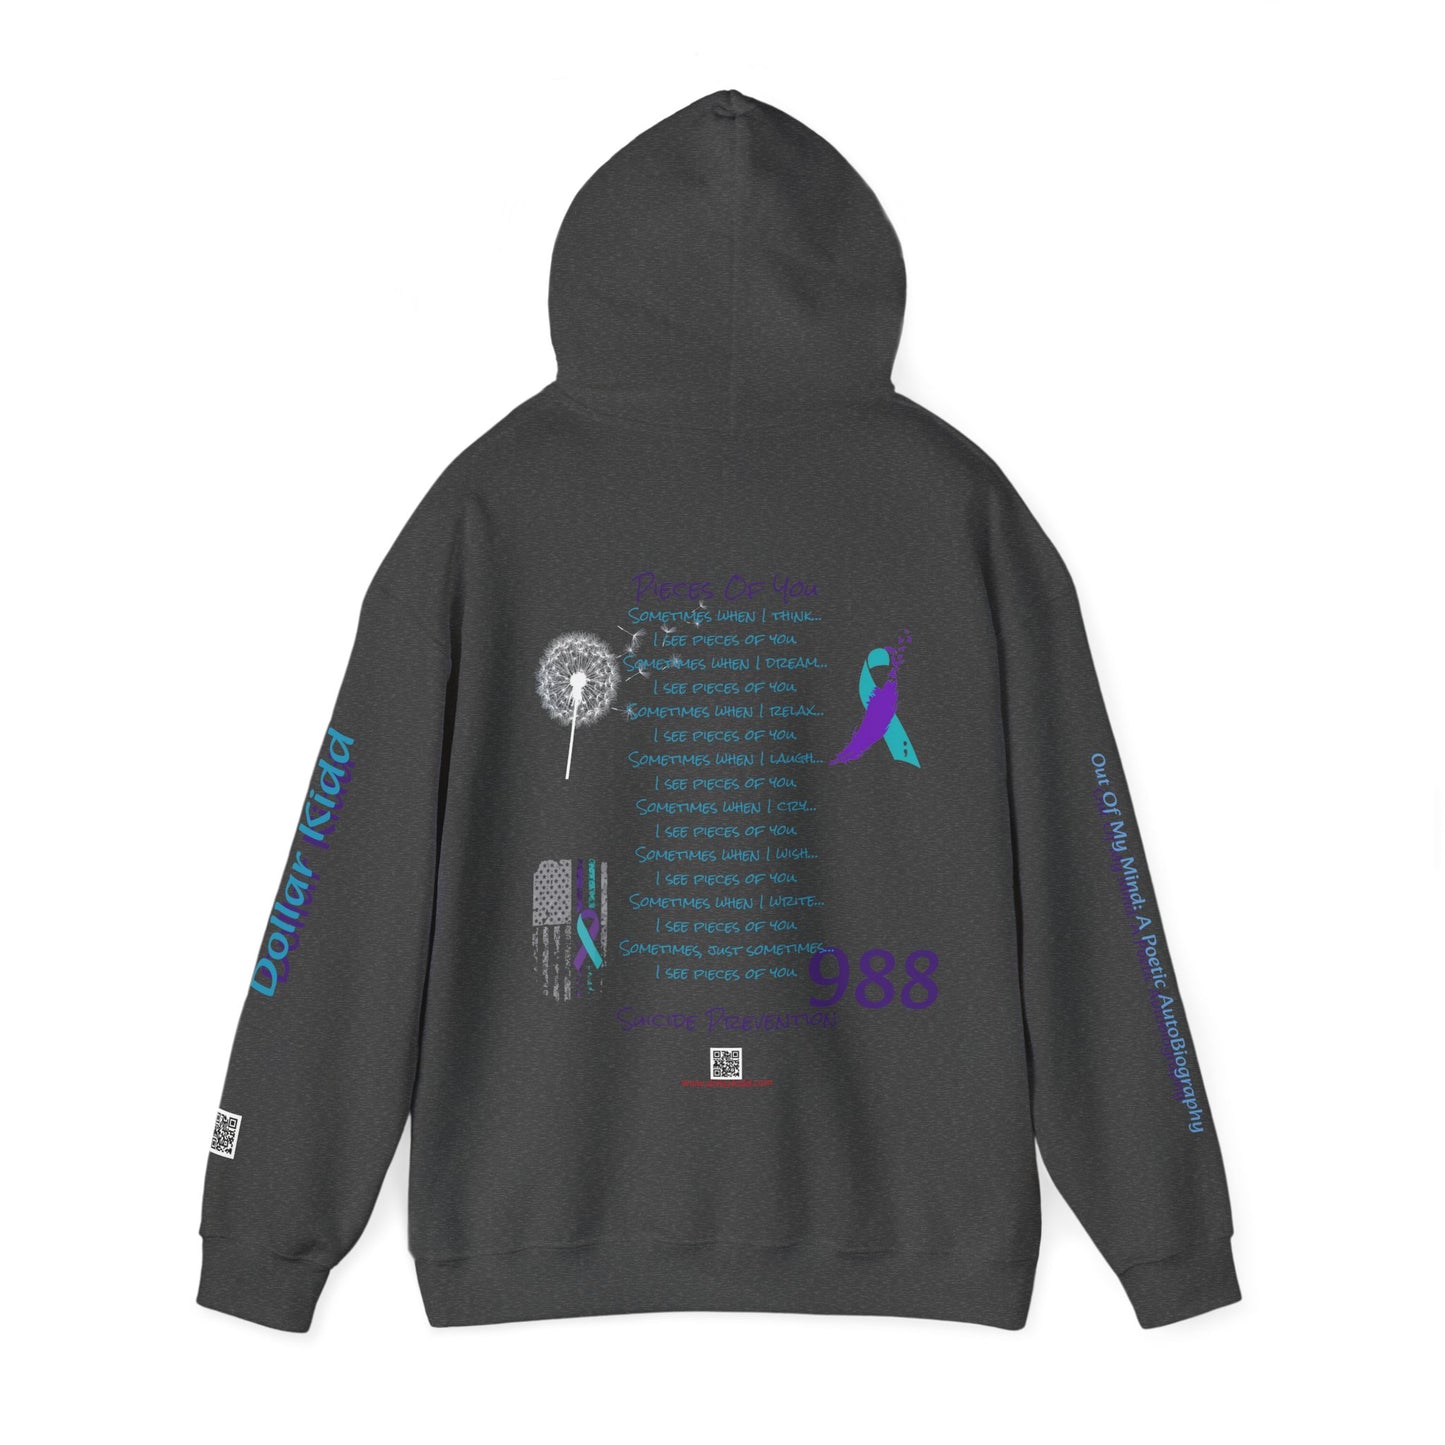 Awareness - Suicide Prevention - Pieces of you Unisex Heavy Blend™ Hooded Sweatshirt